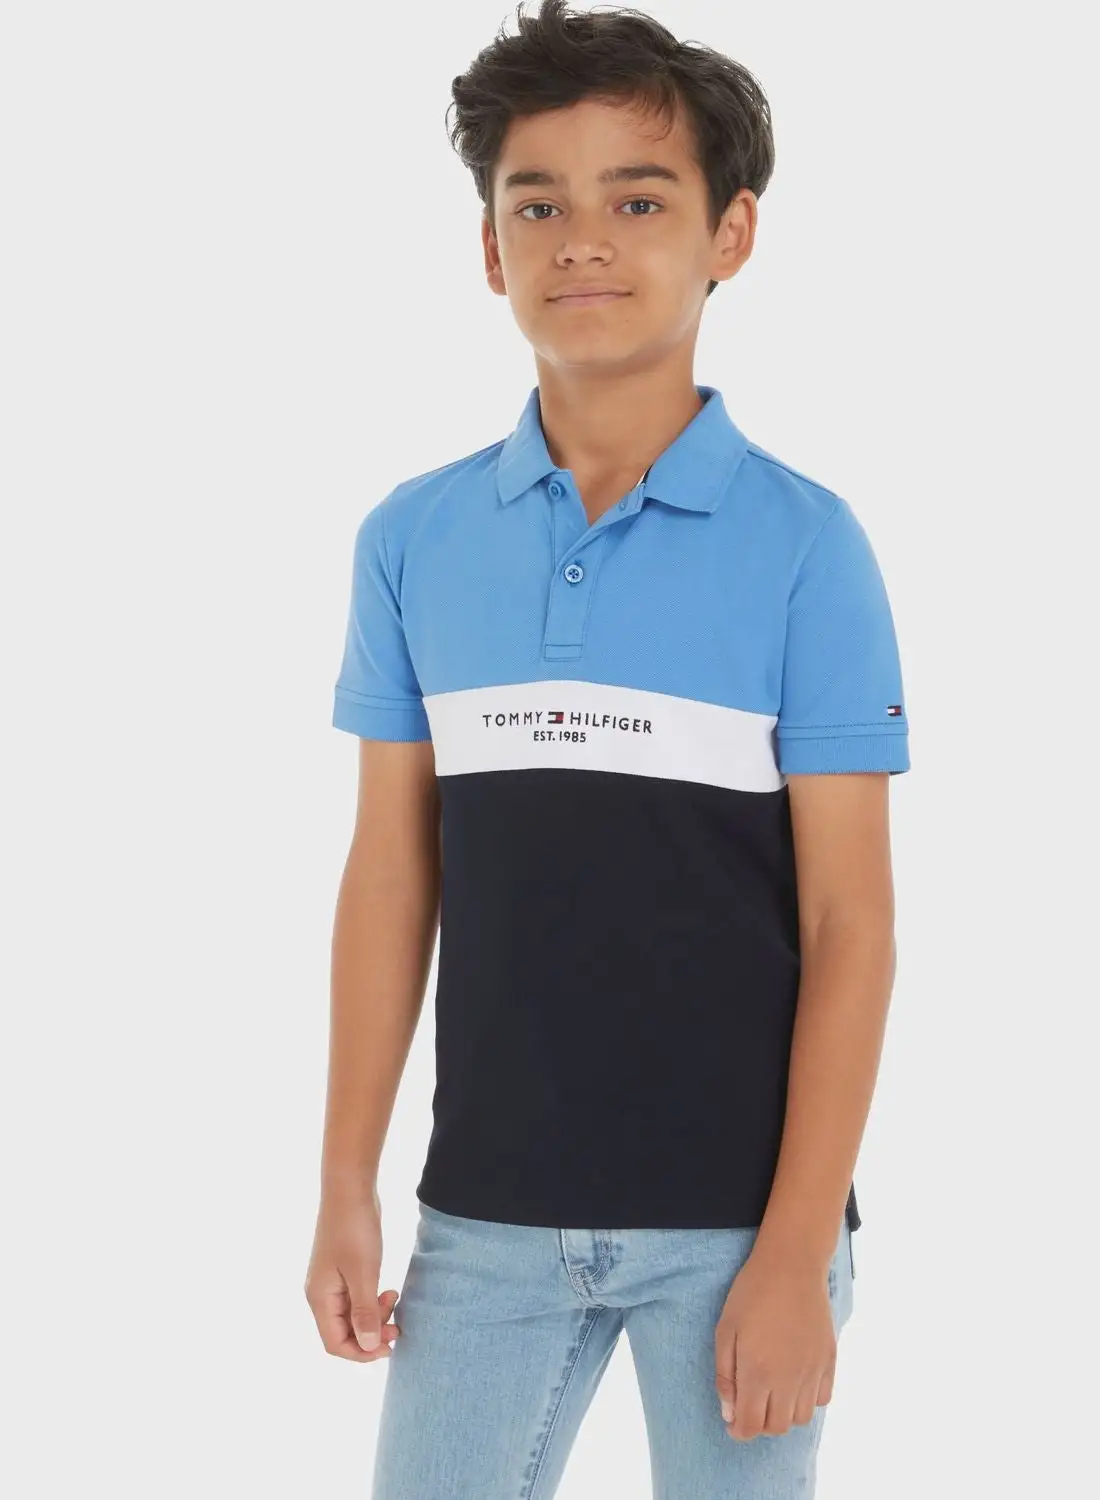 TOMMY HILFIGER Youth Color Block Polo